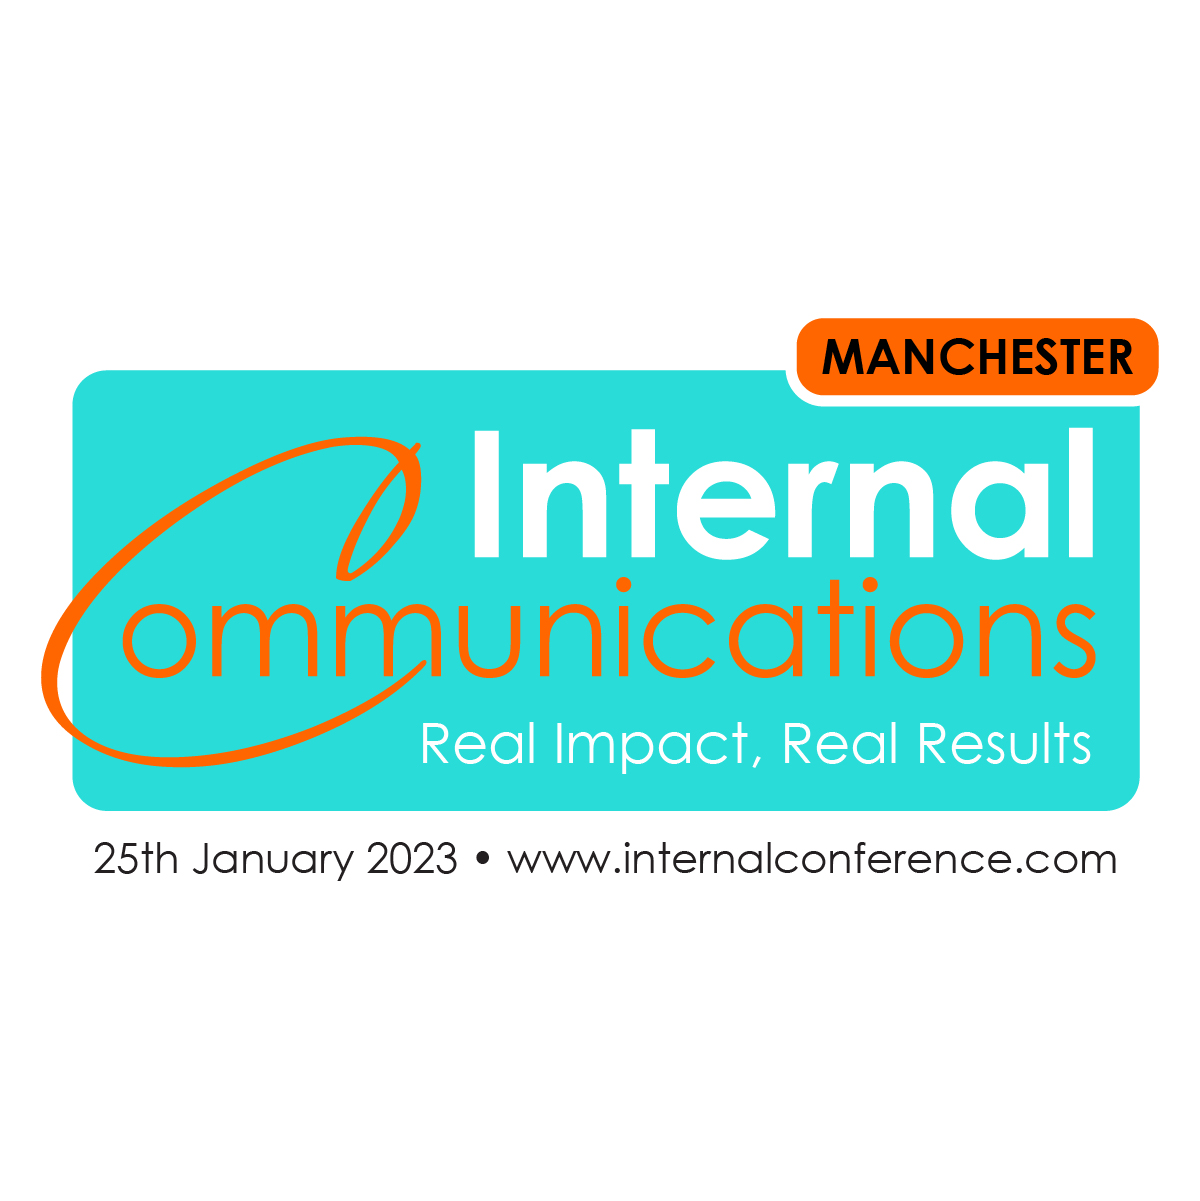 The Internal Communications Conference Manchester